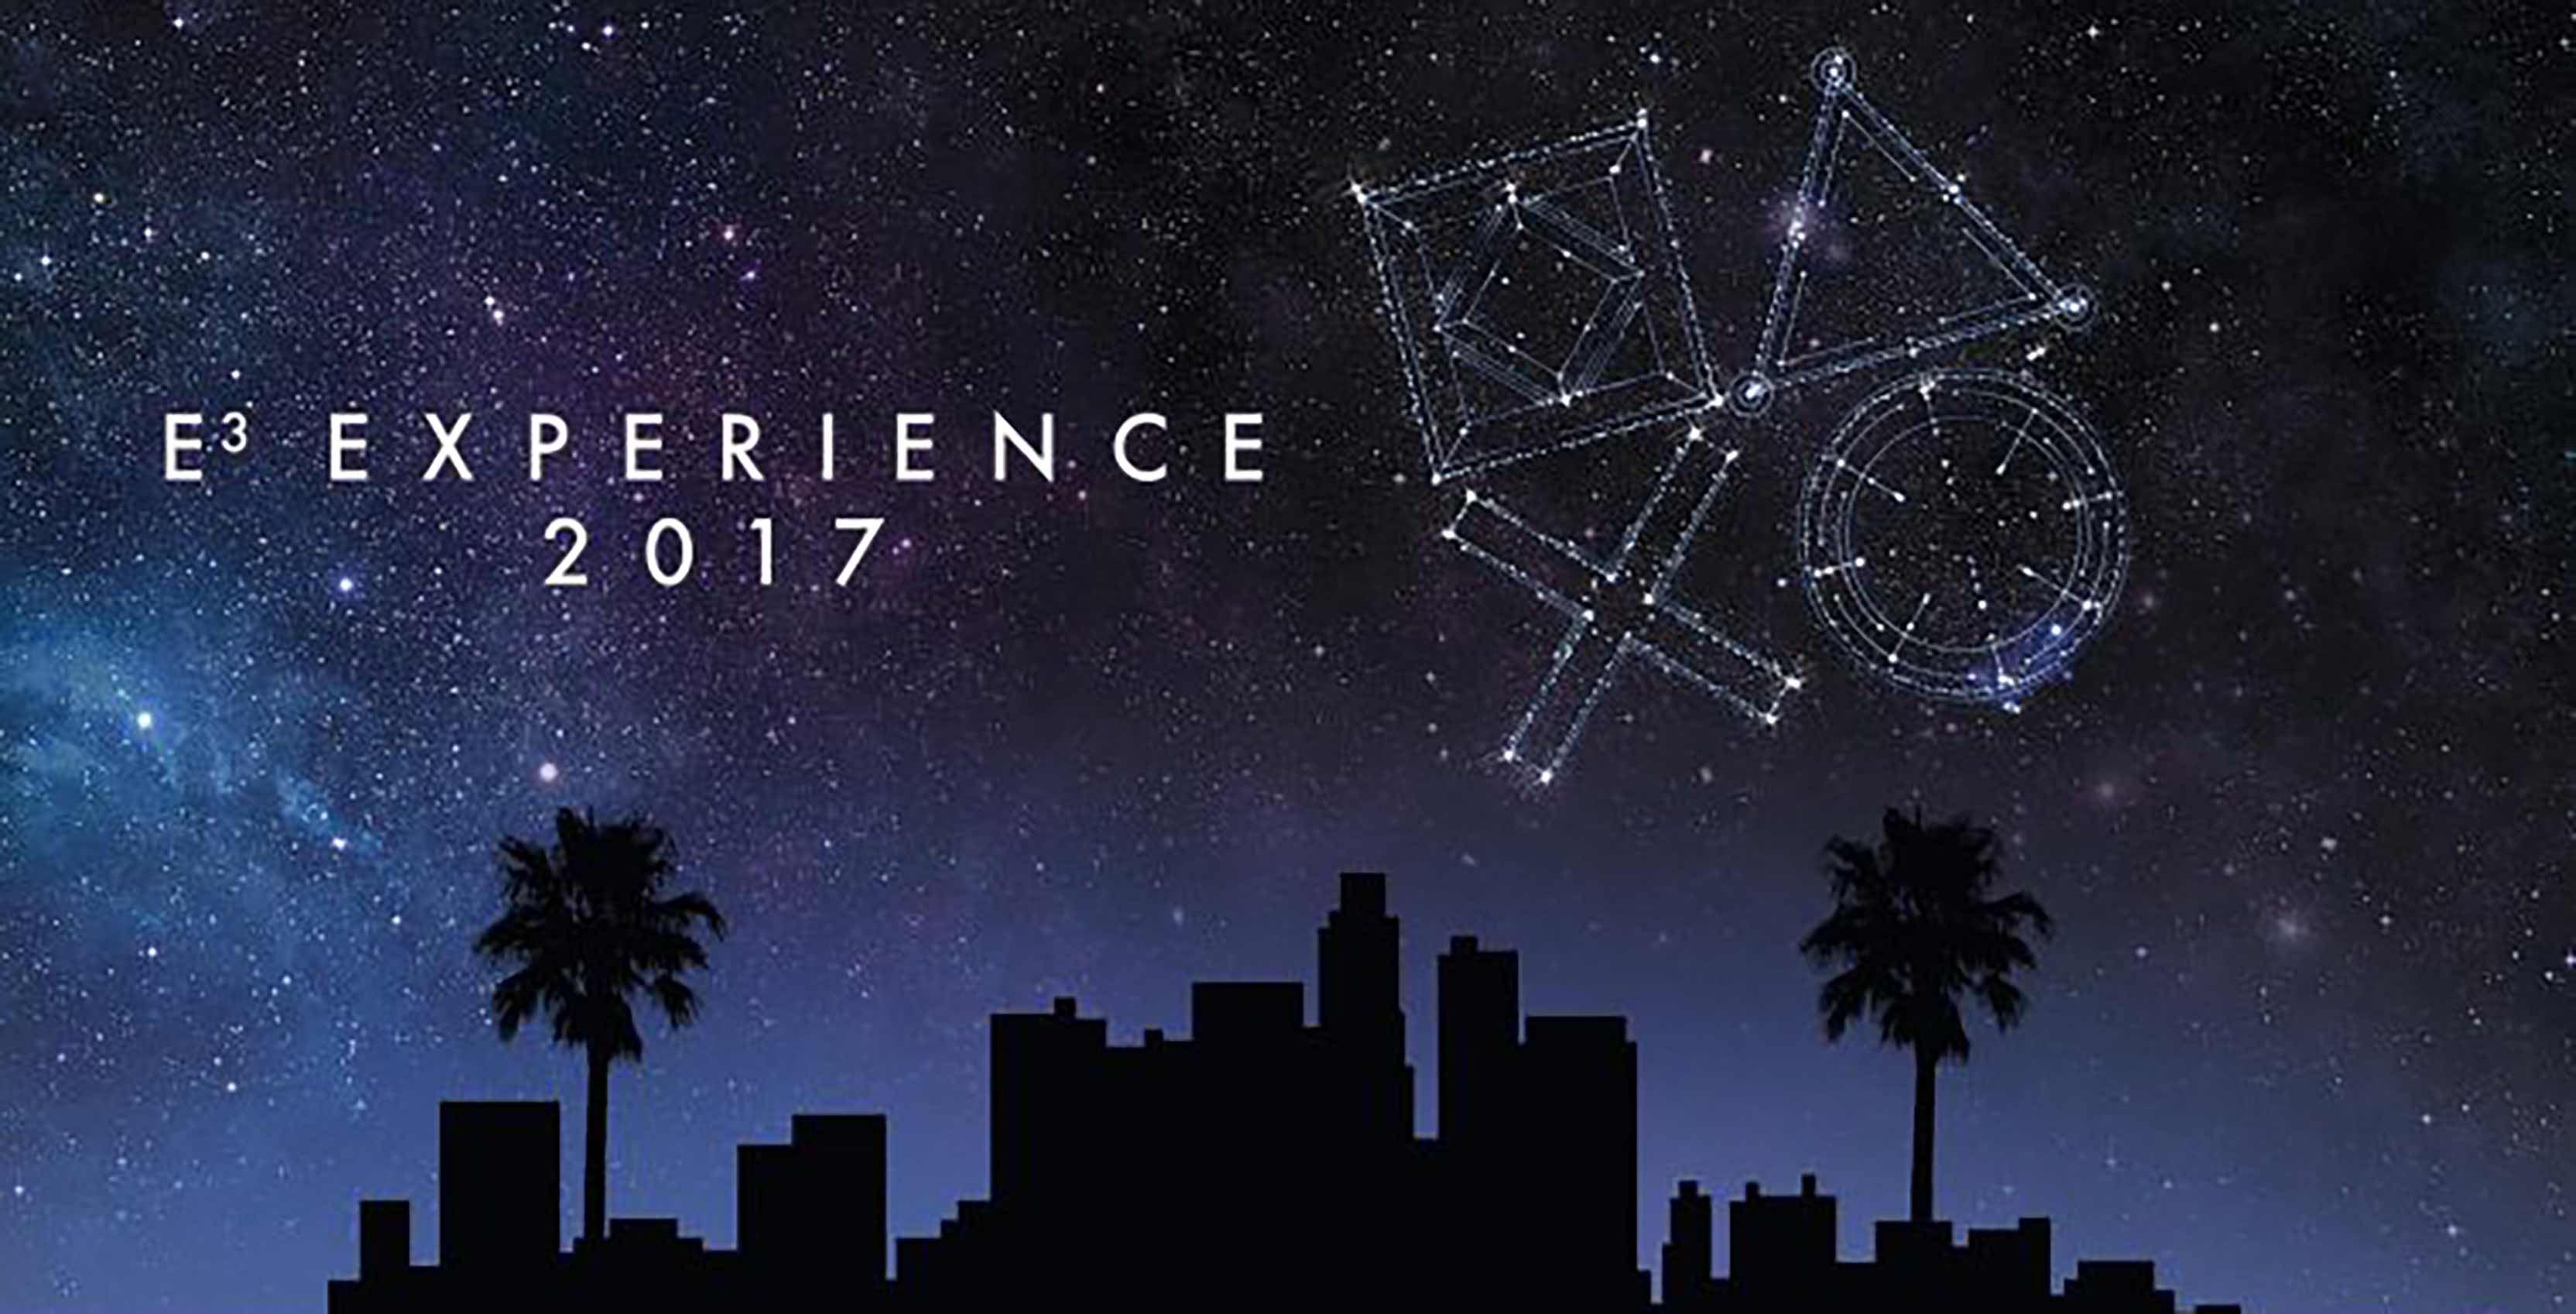 PlayStation E3 Experience poster